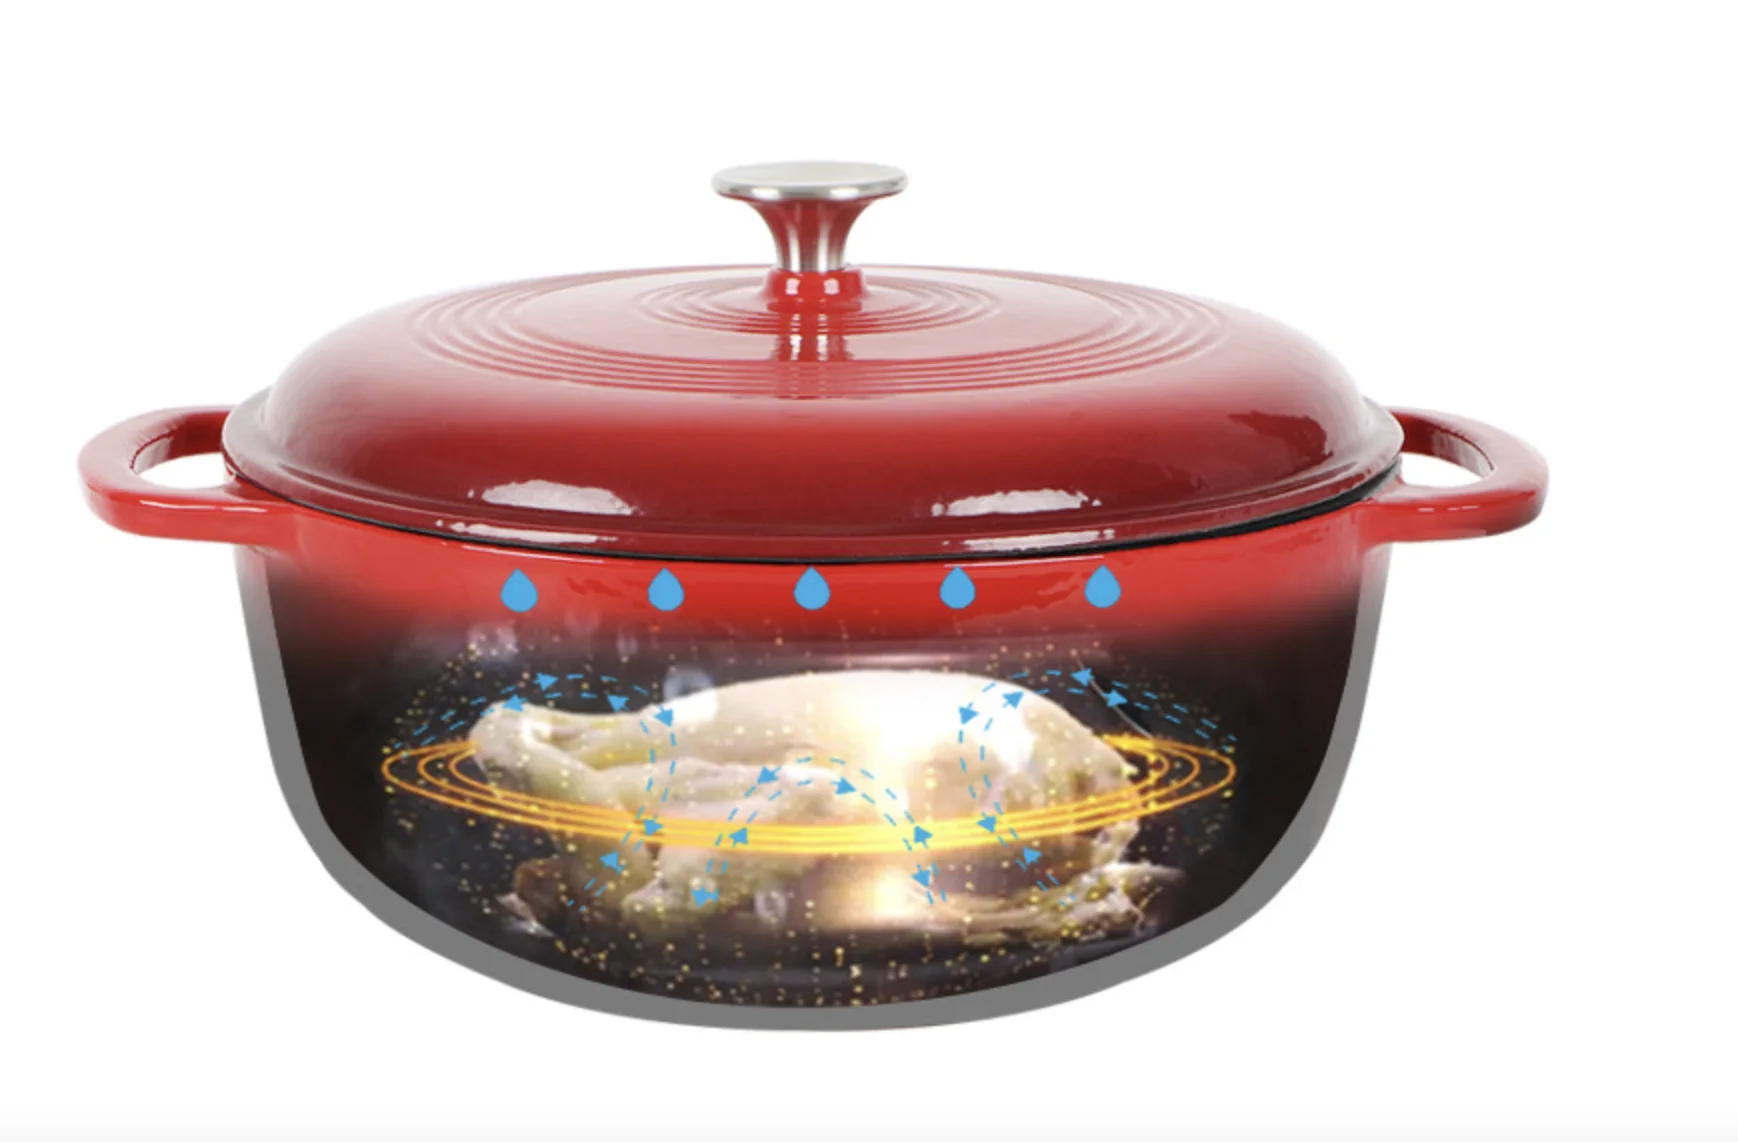 New Arrival Kitchen 28CM 7L Classic Non-Stick Red Seasoned Camp Cast Iron Enameled Dutch Oven Pot with Lid